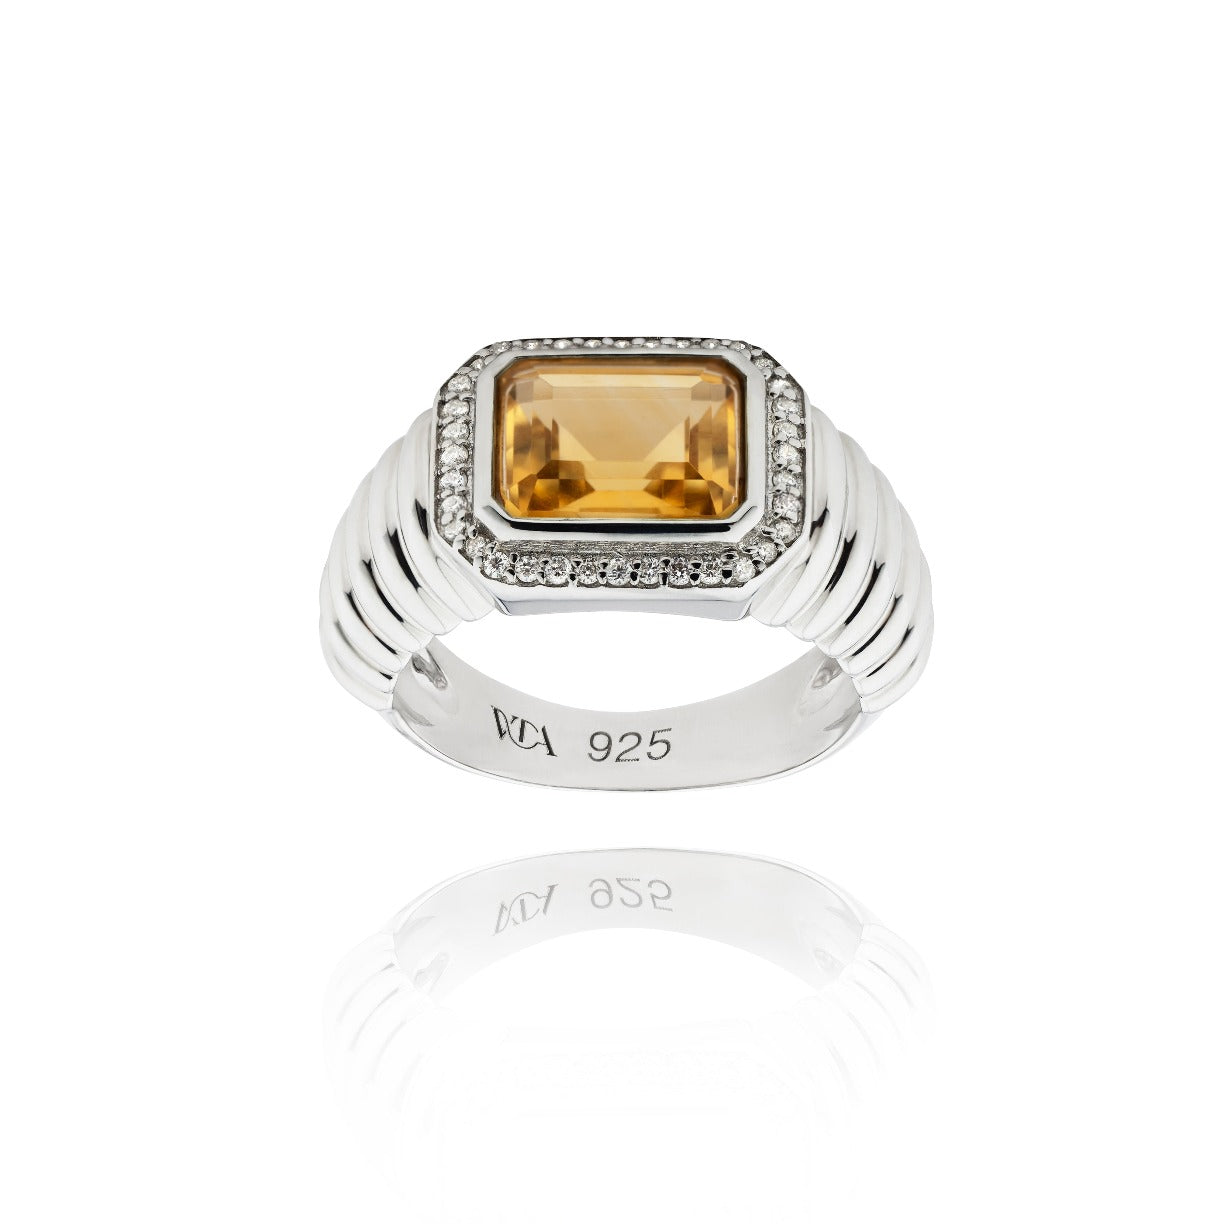 Marly Ring Silver, Citrine 